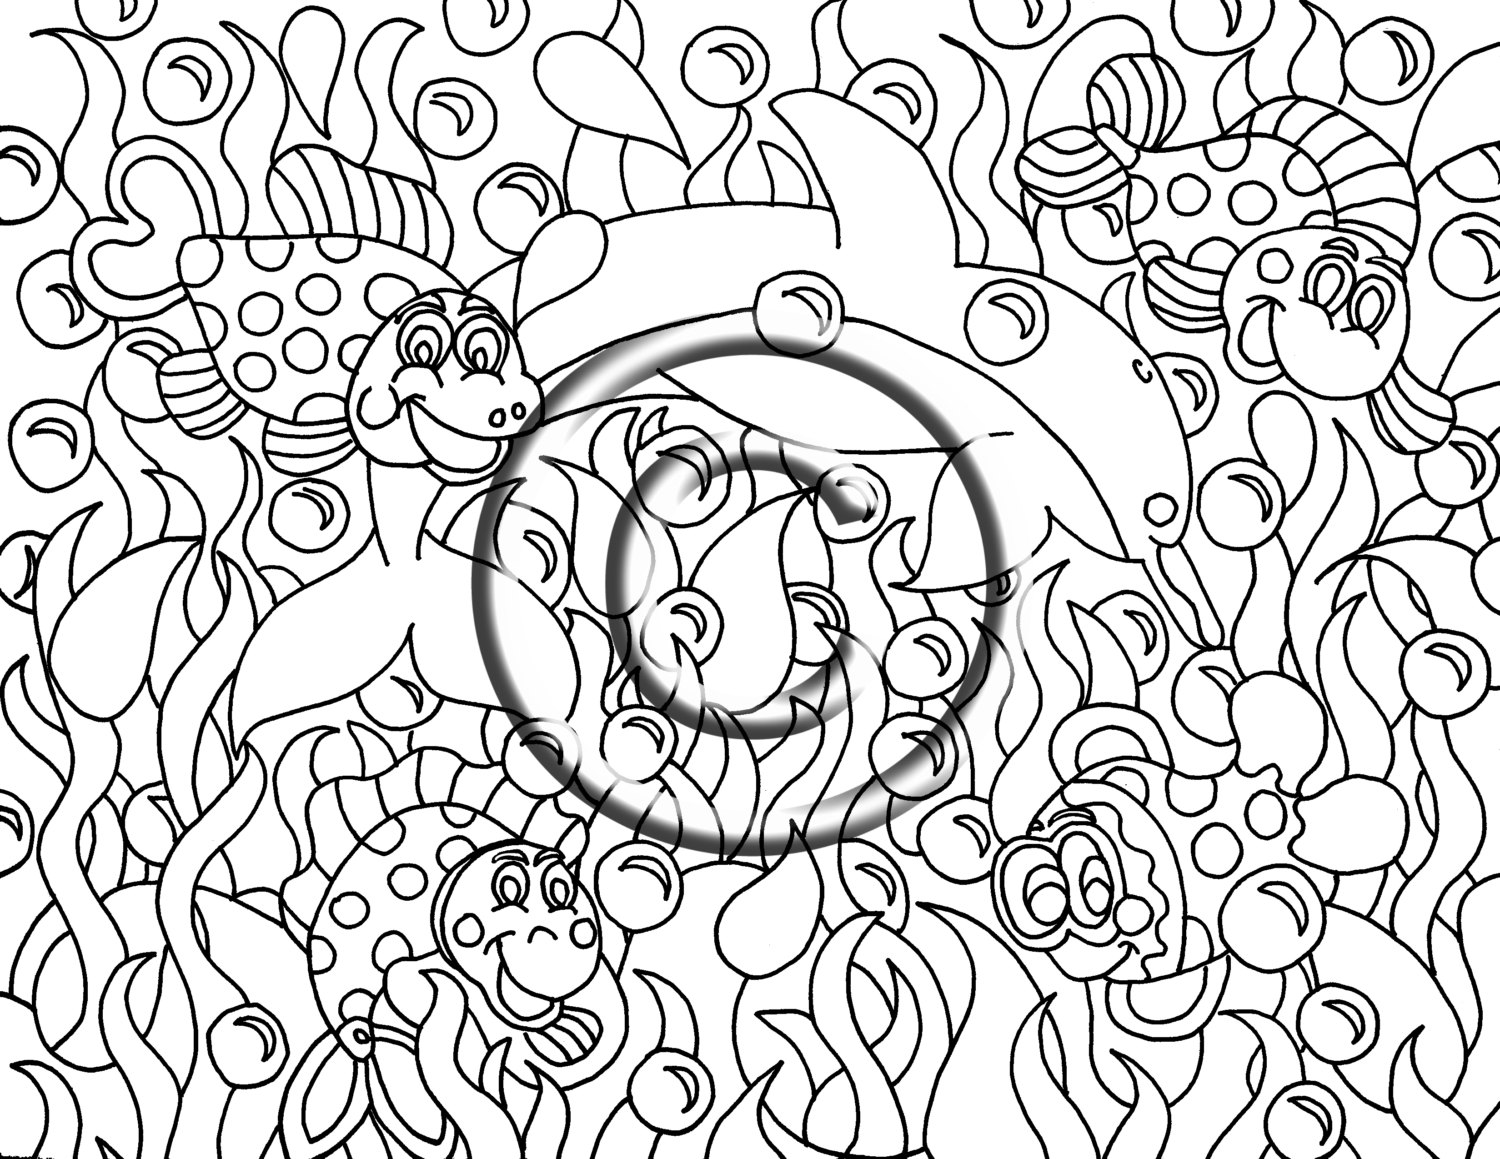 Psychedelic coloring pages to download and print for free